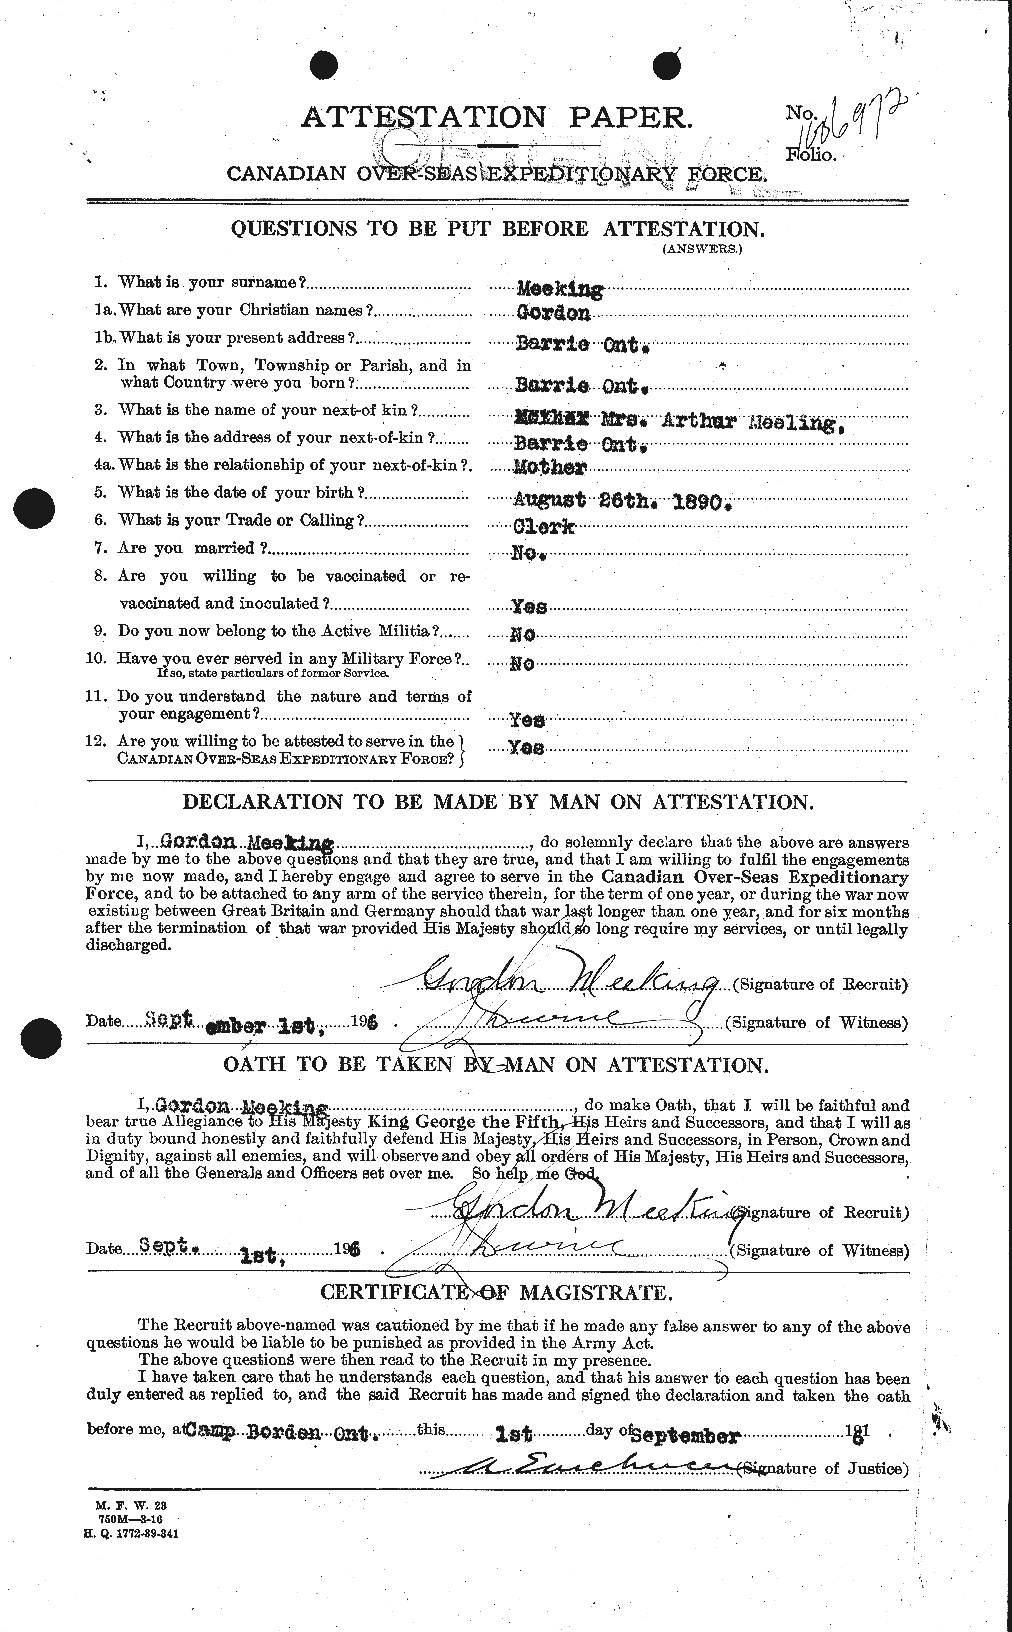 Personnel Records of the First World War - CEF 487714a